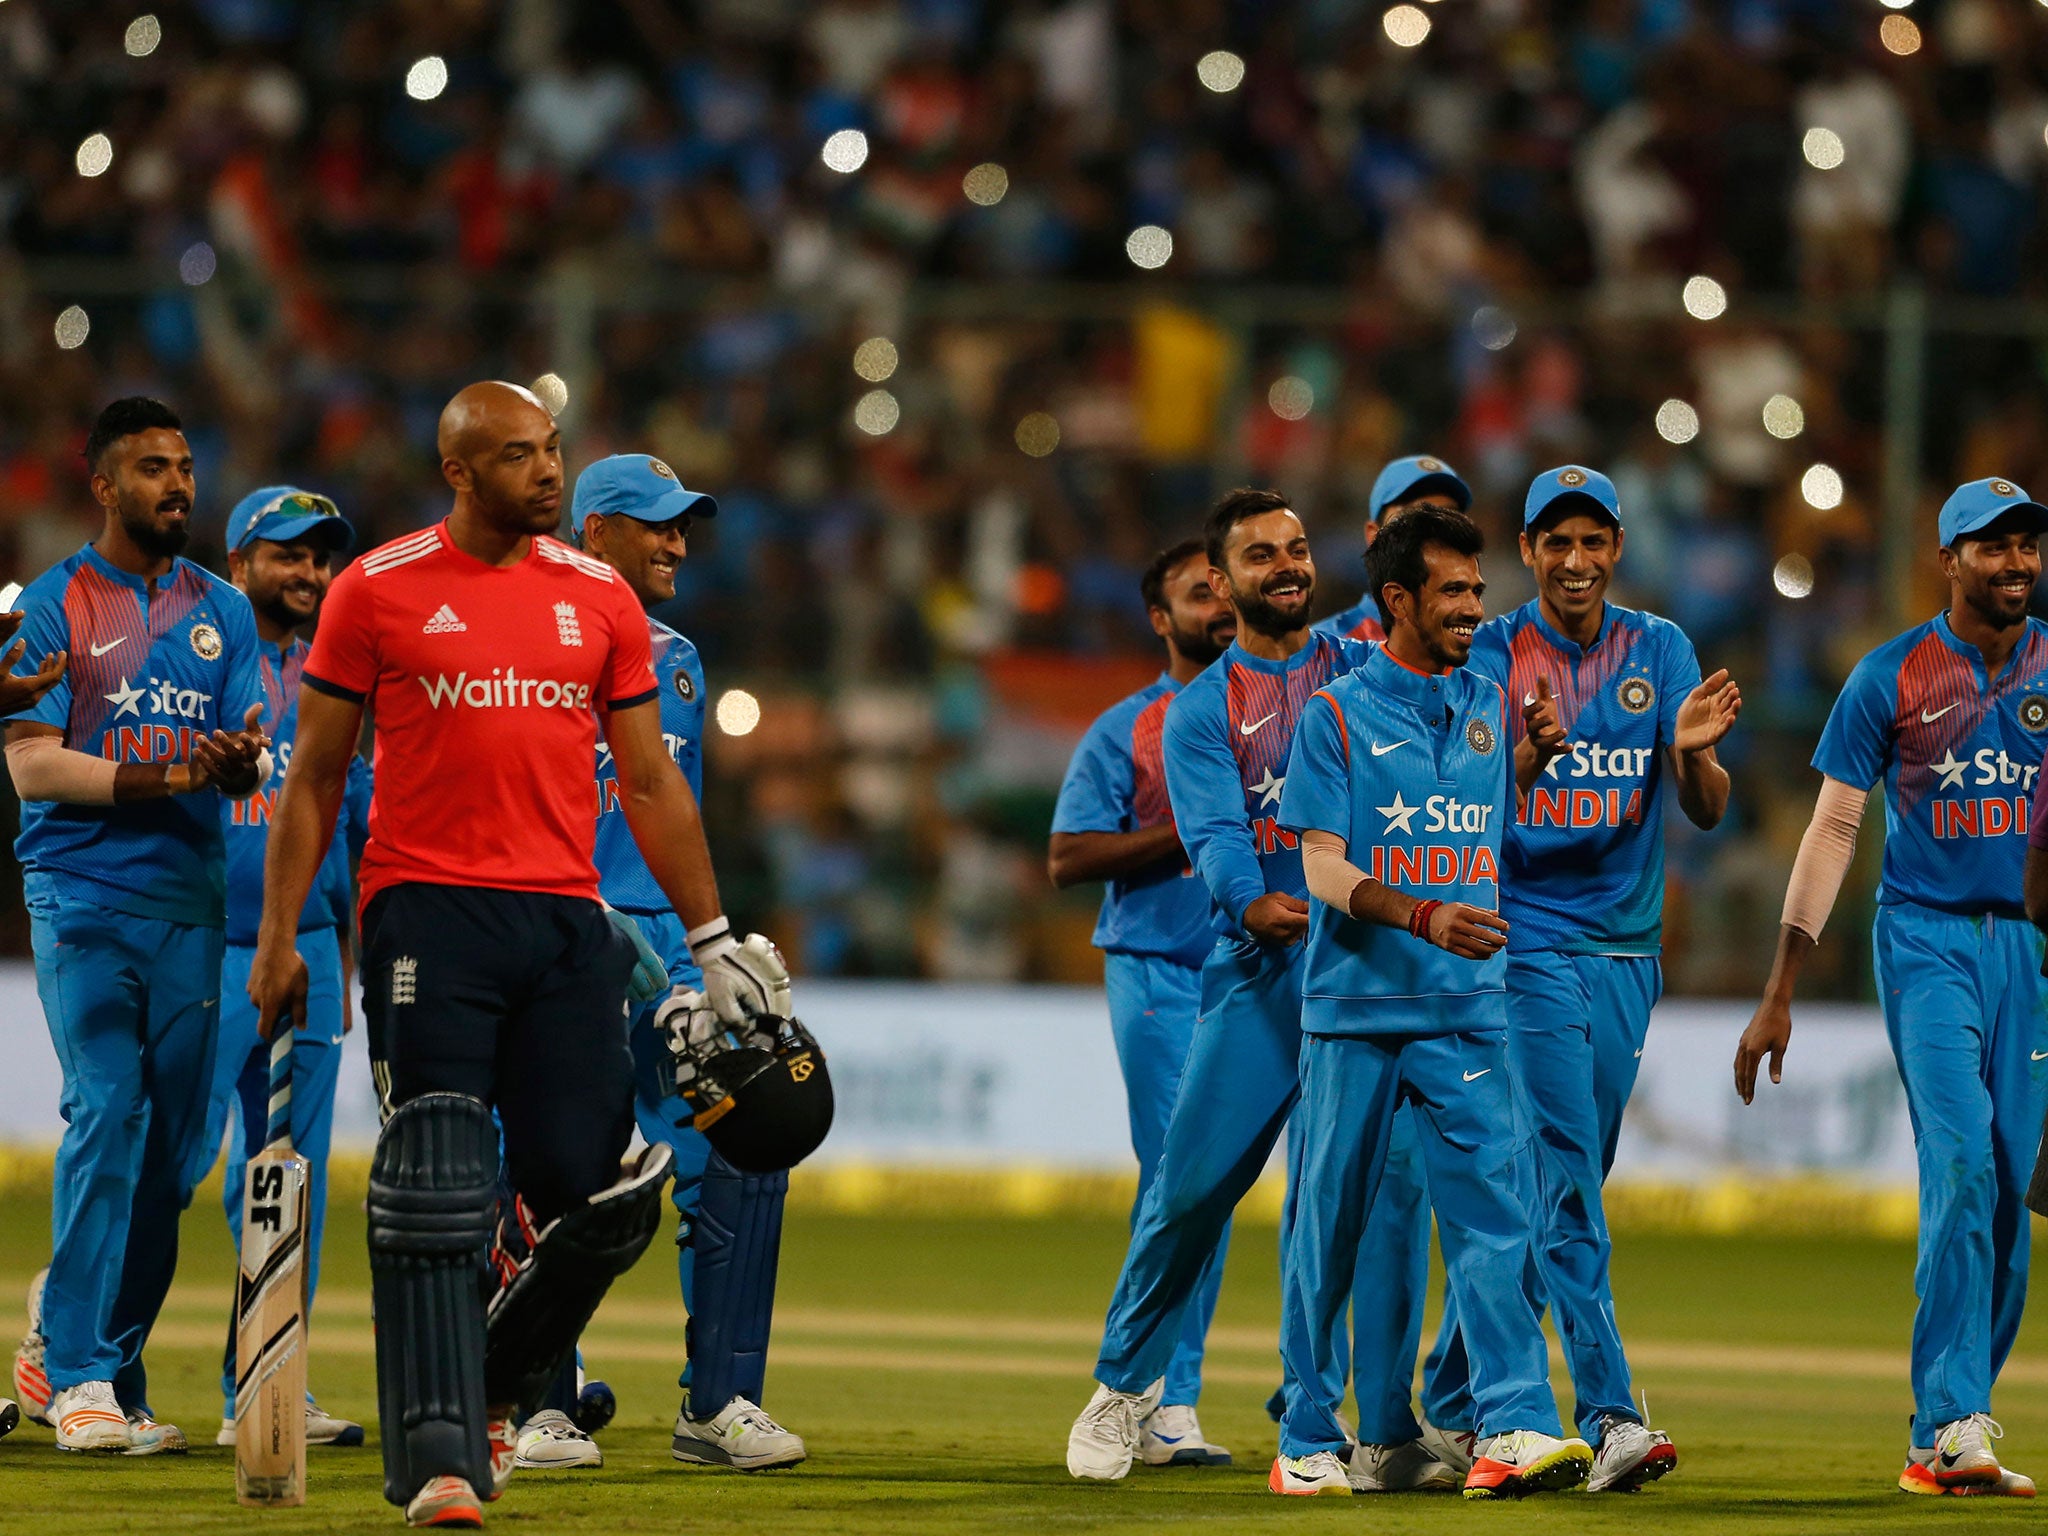 Indian cricketers celebrate their victory over England in their third Twenty20 international cricket match at Chinnaswamy Stadium in Bangalore,